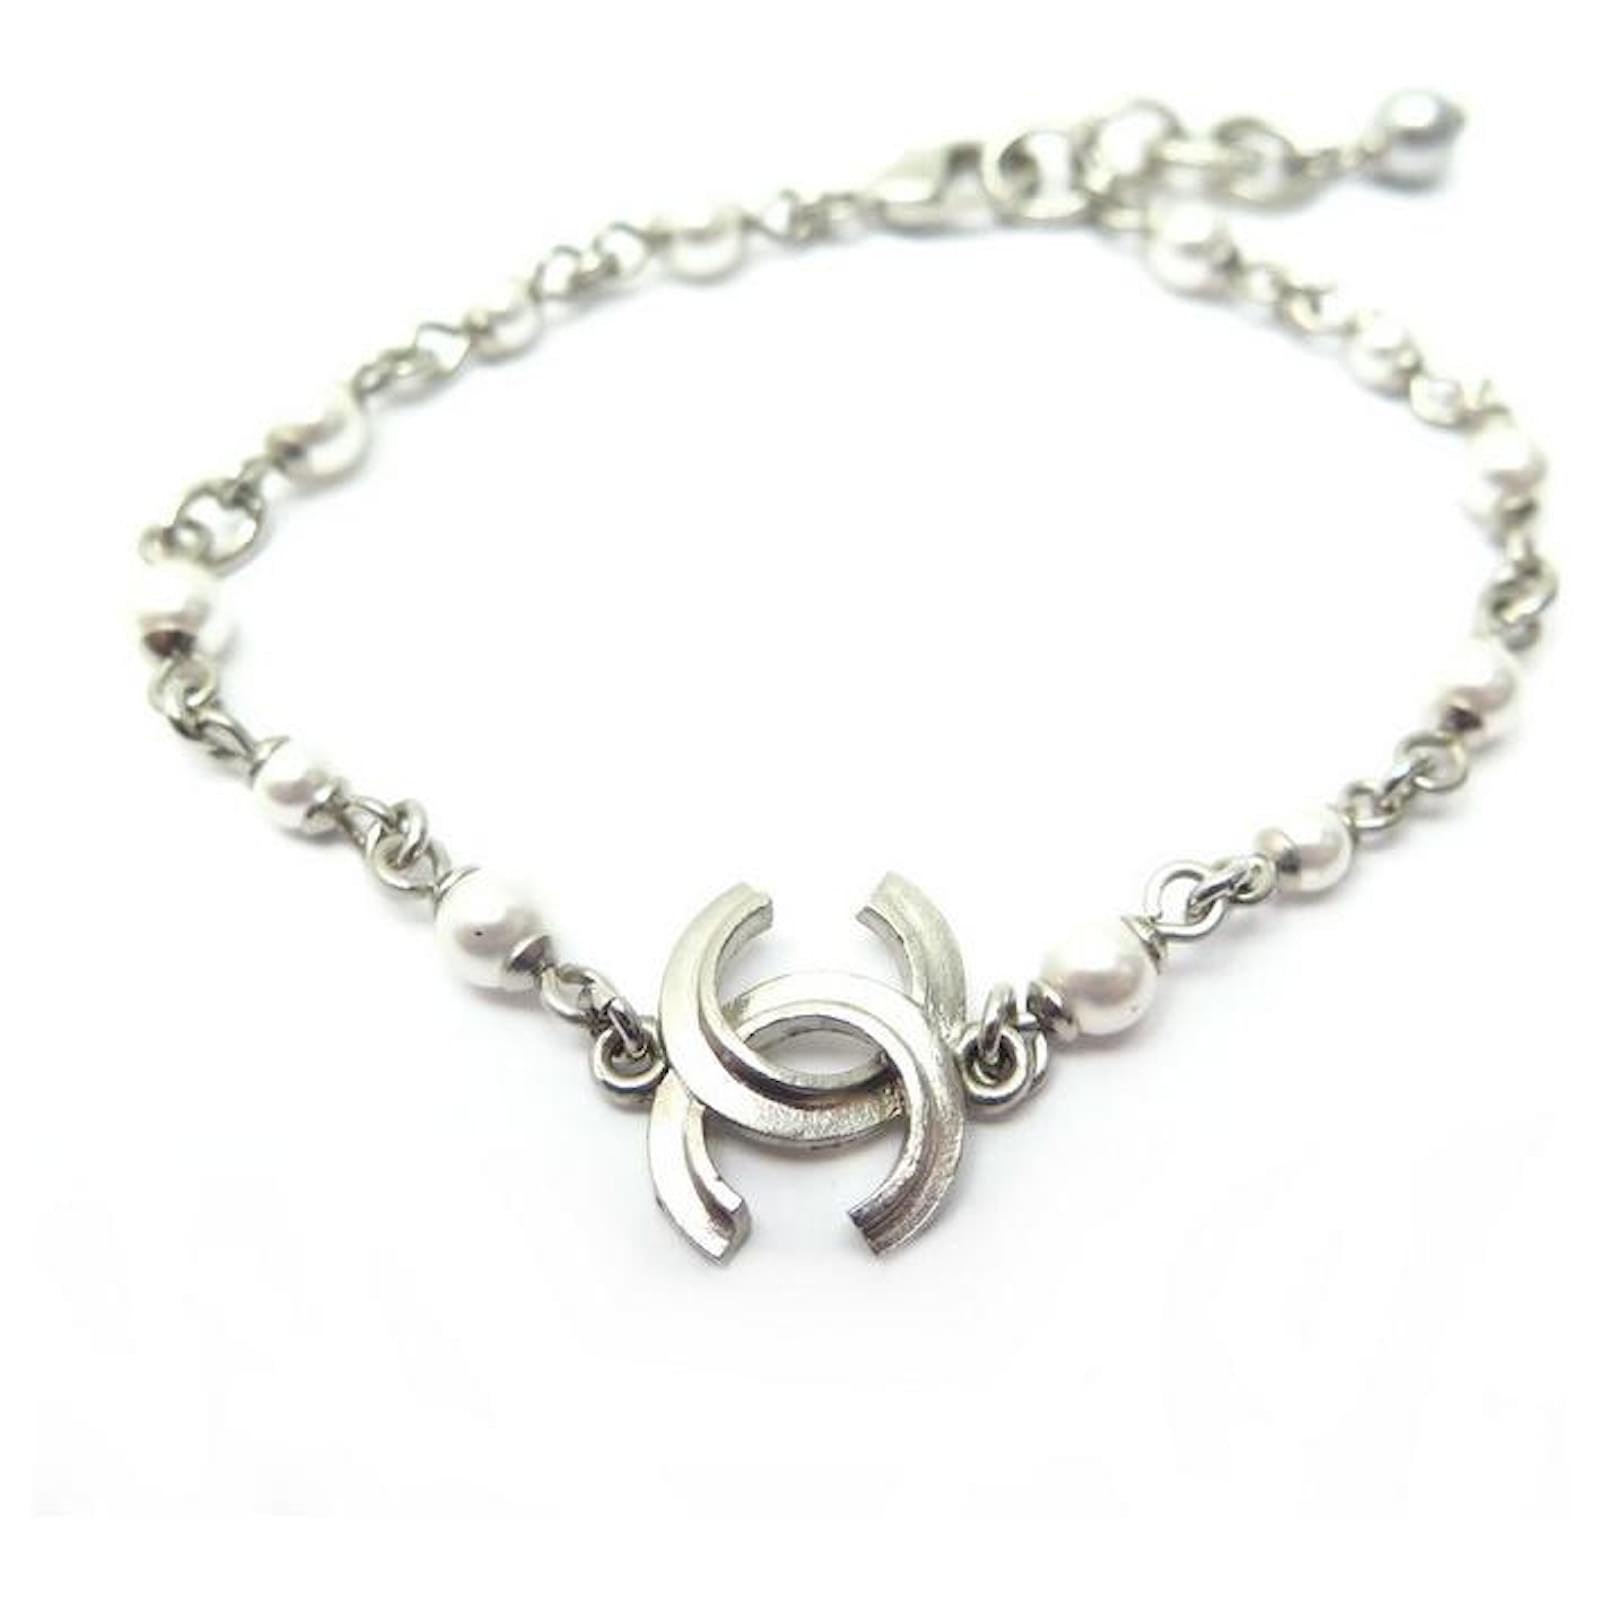 NEW CHANEL LOGO CC BRACELET 2021 IN SILVER METAL CHAIN & PEARL BEADS